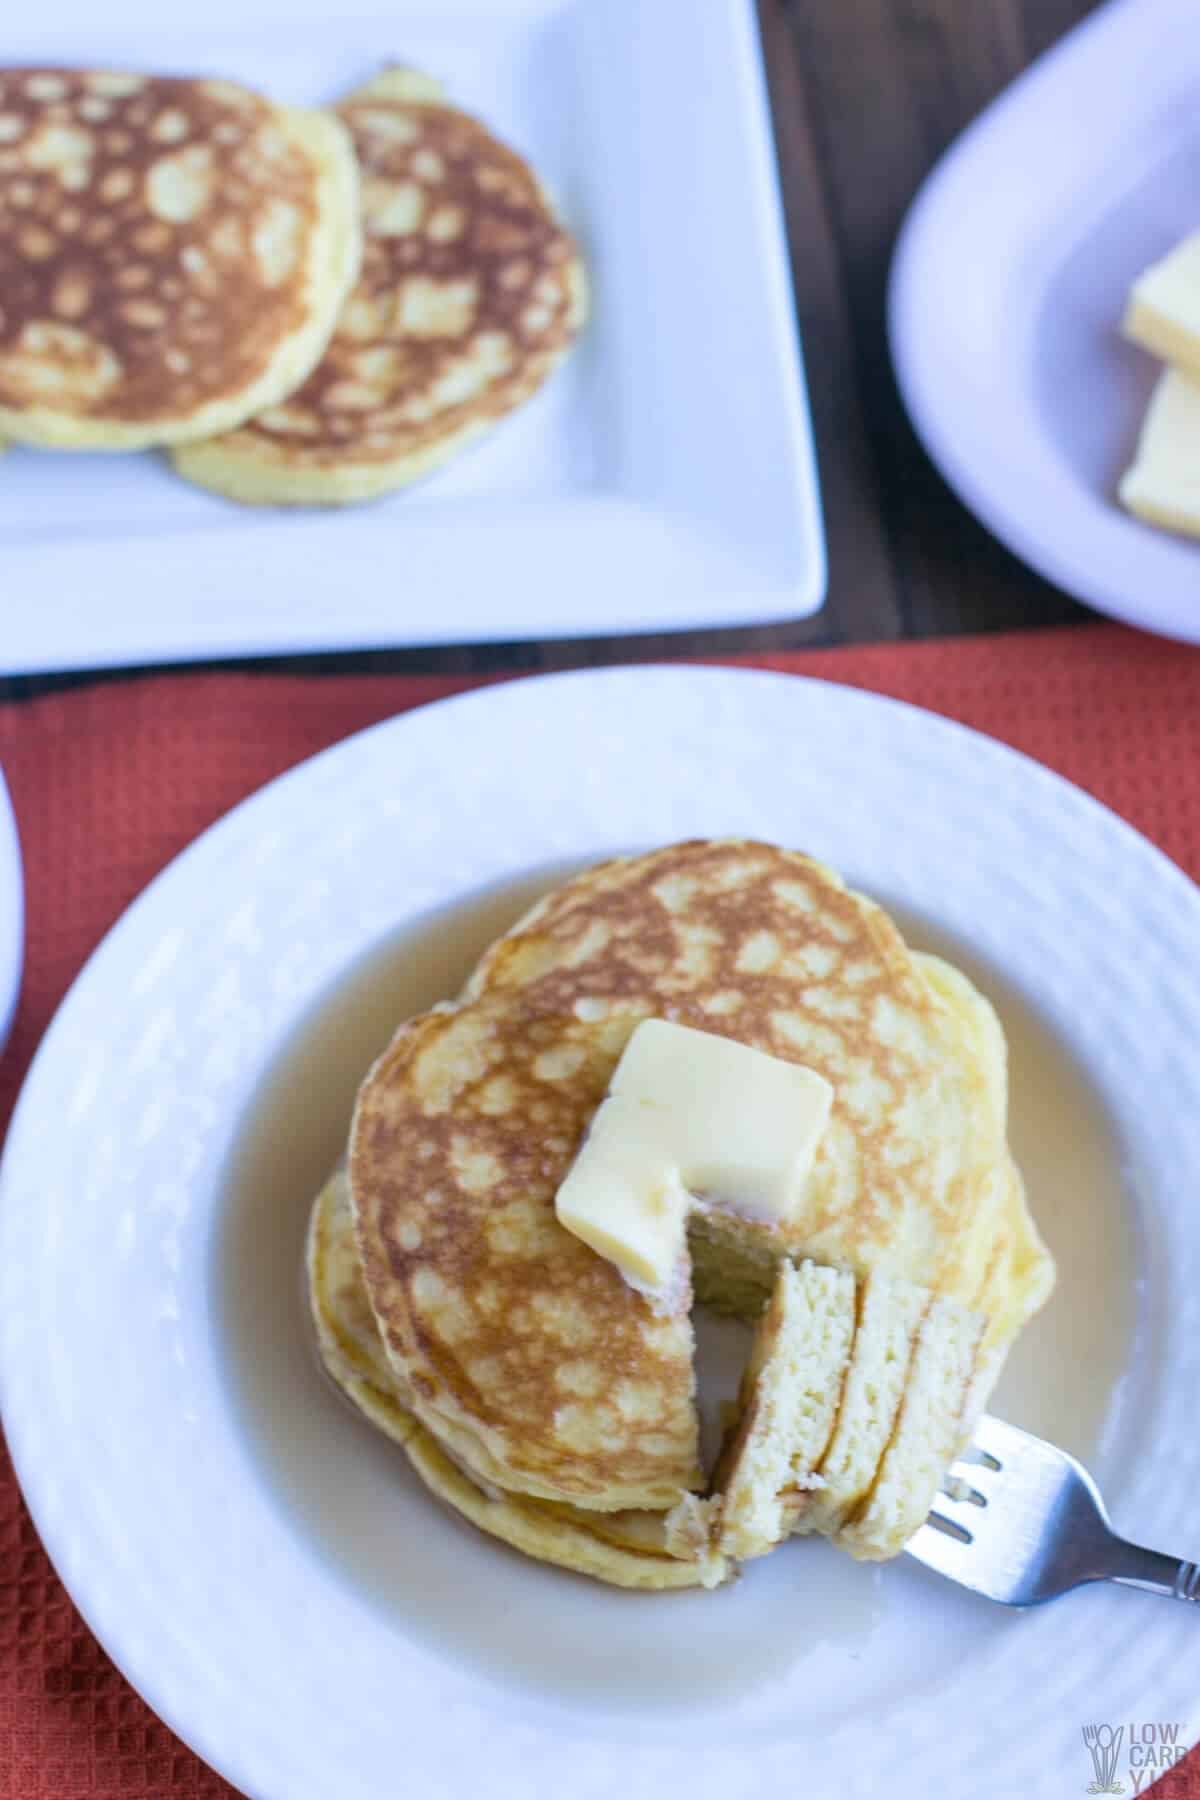 keto coconut flour pancakes on white plate with fork bite